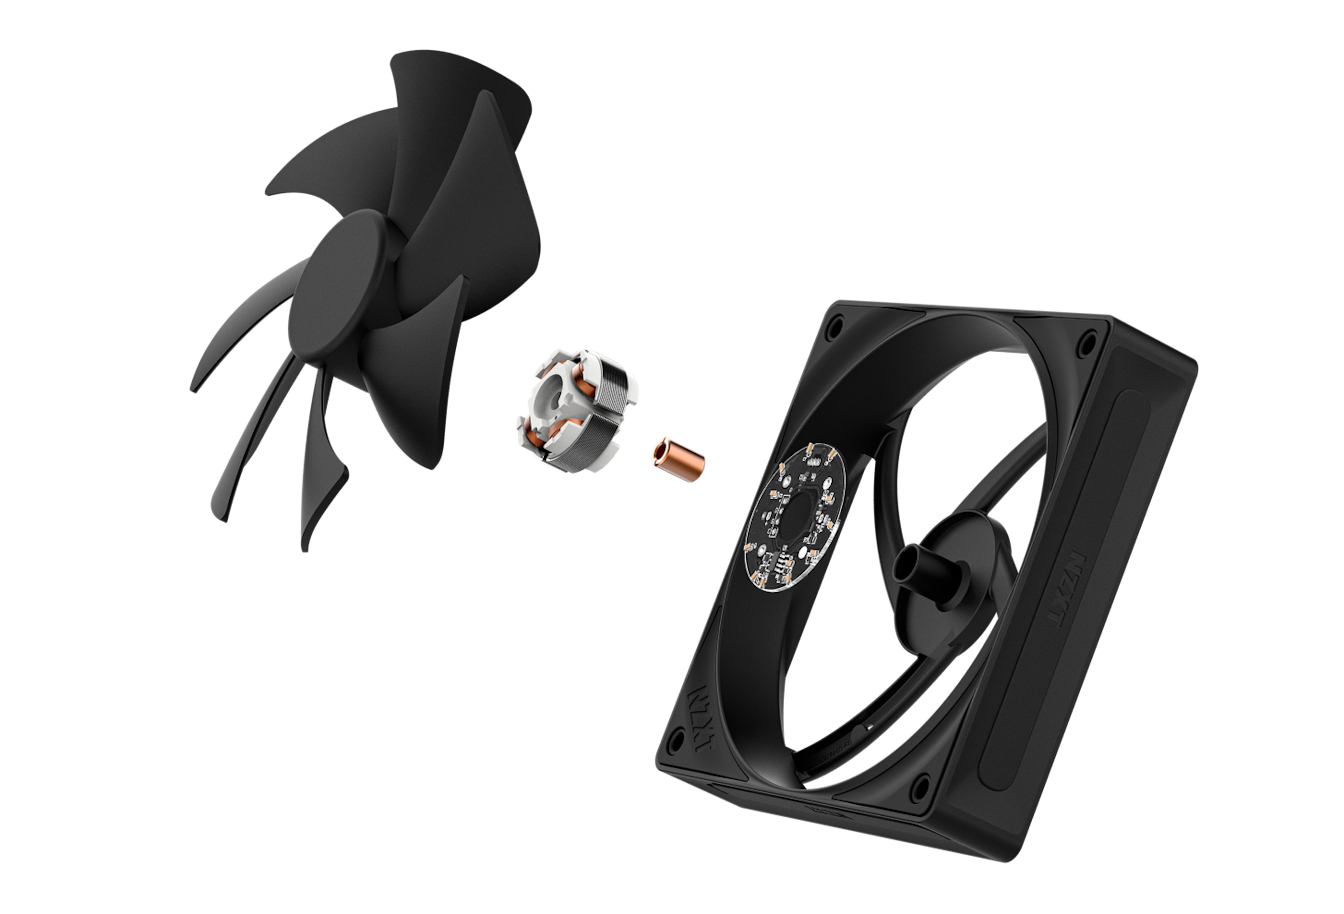 Exploded view of black static pressure fan showing internal components